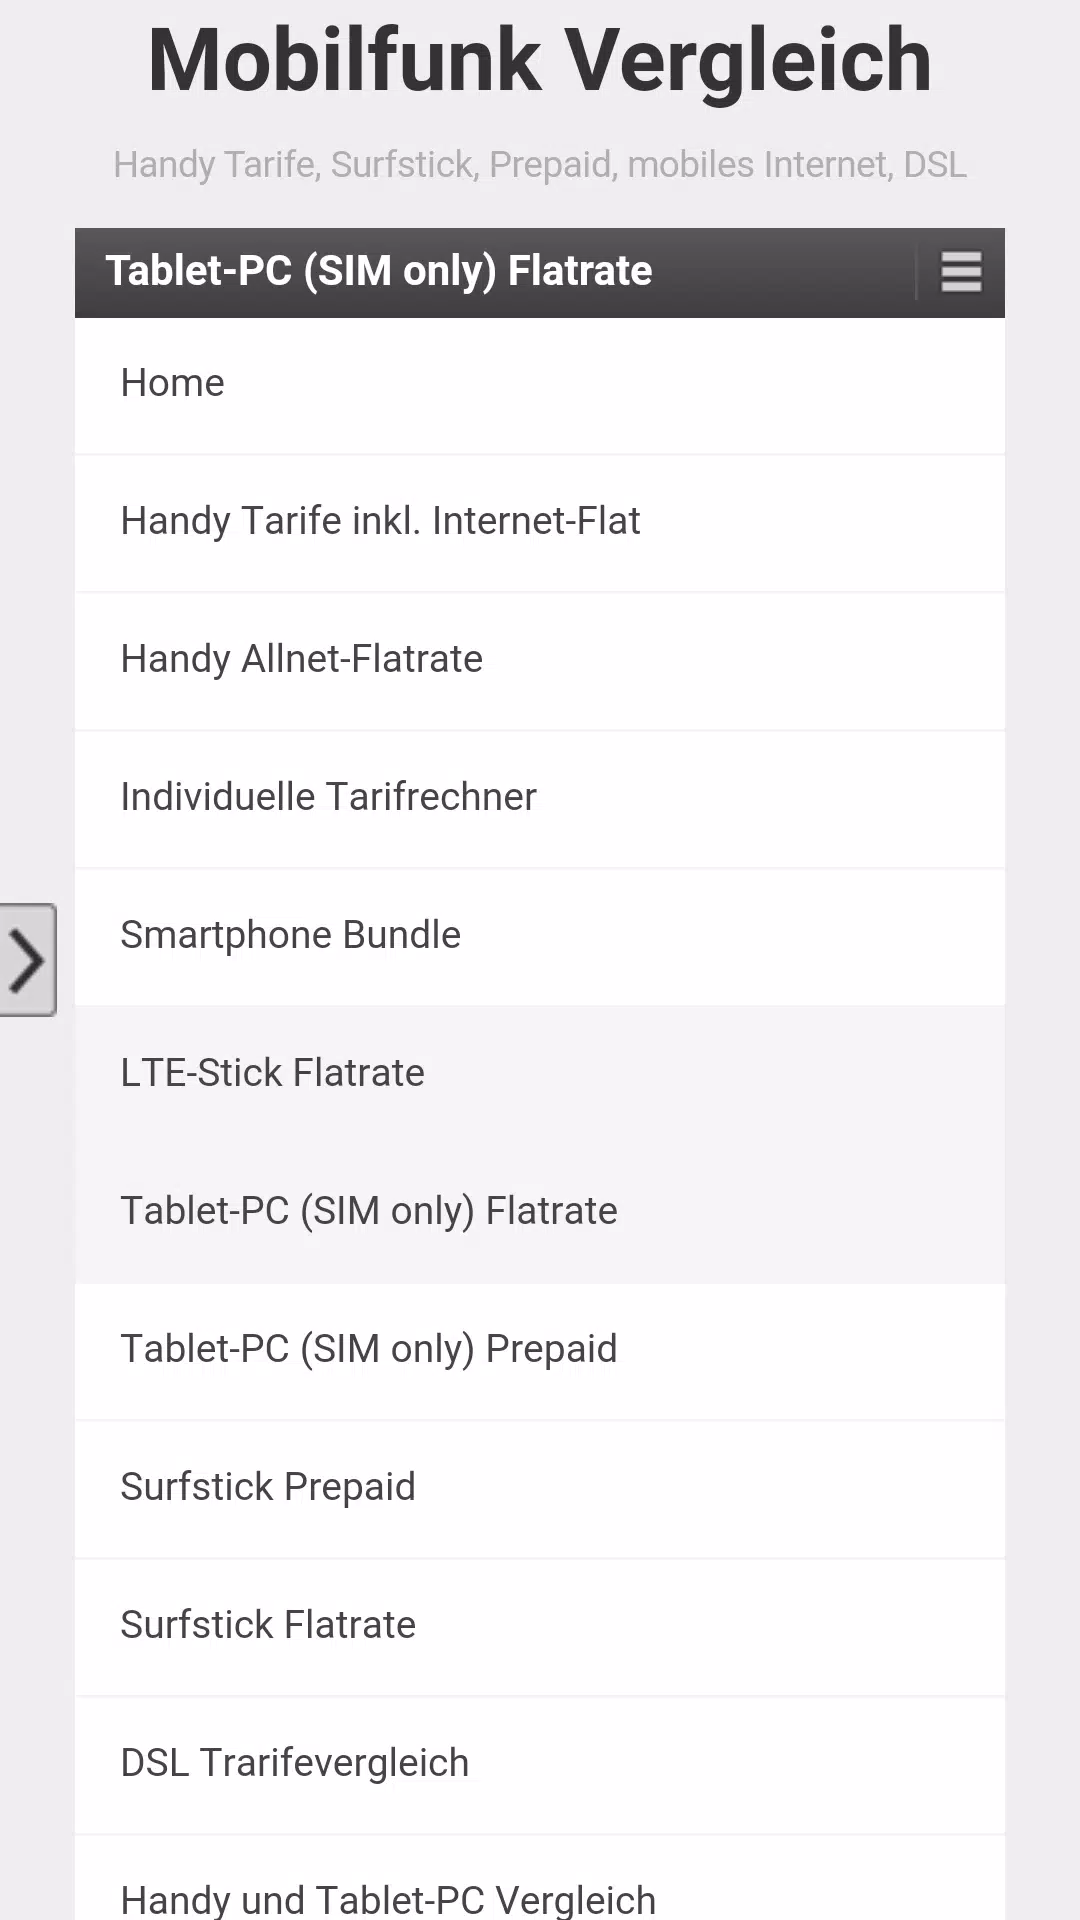 Handy DSL Tarife Vergleich for Android - APK Download